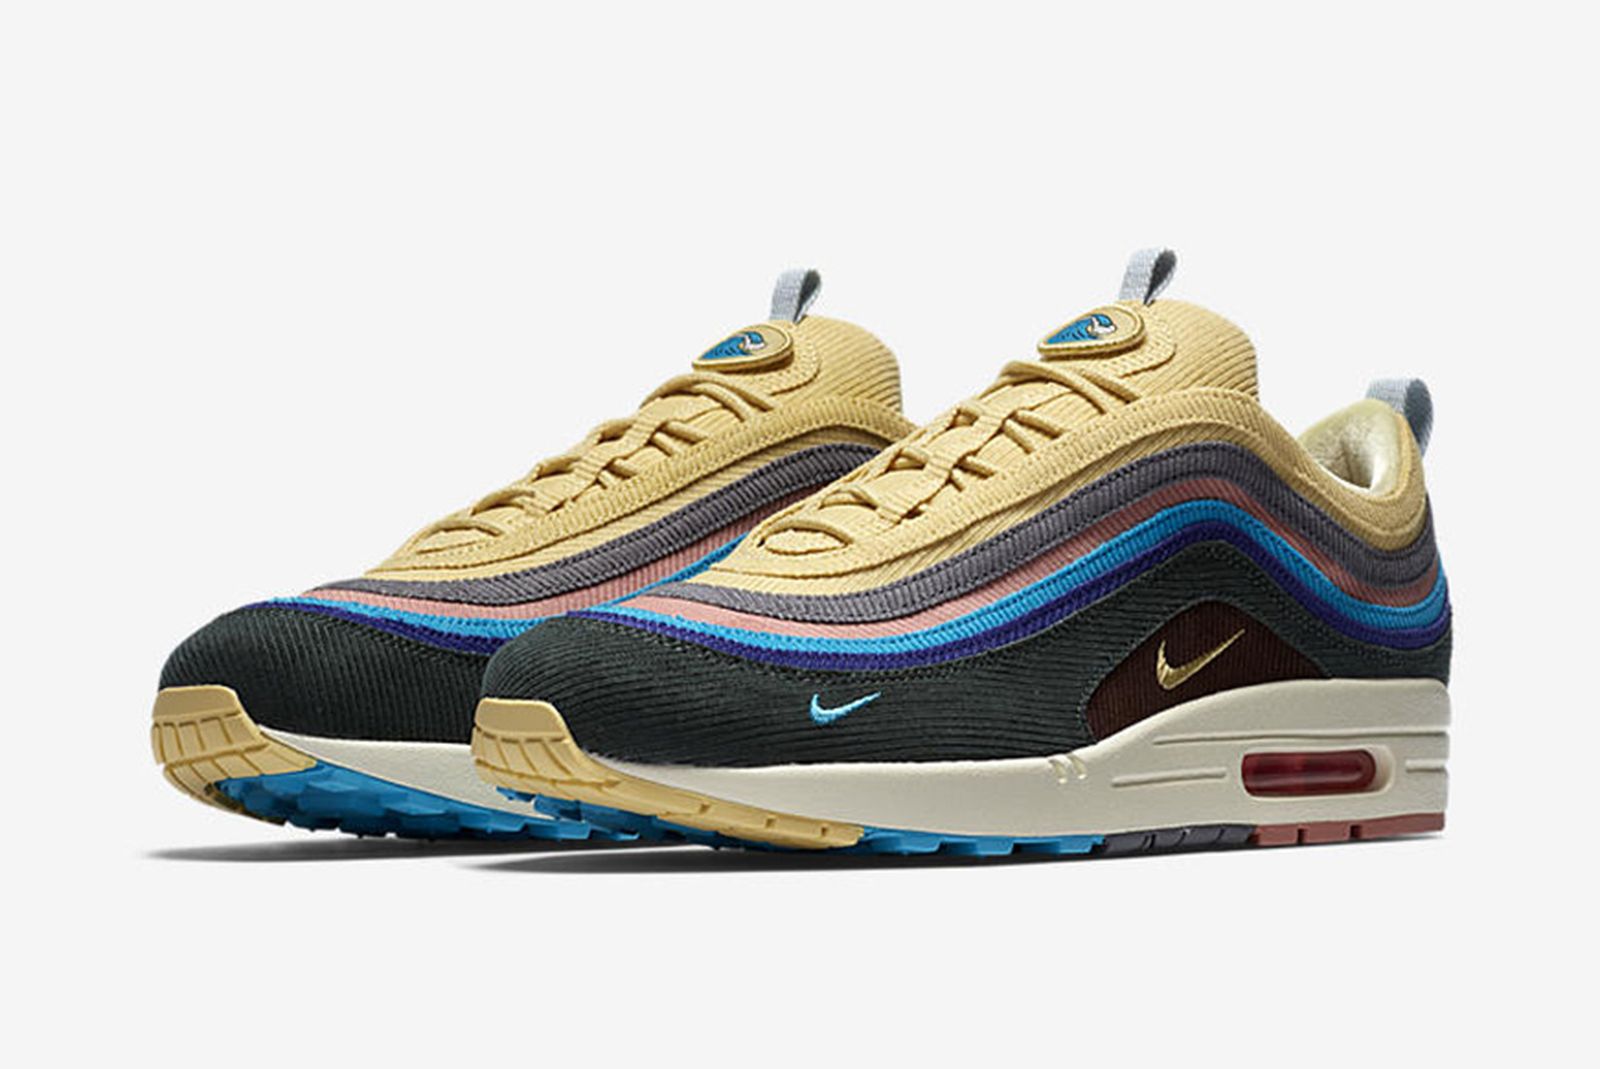 neutral límite papel Sean Wotherspoon x Nike Air Max 1/97: Release Date, Price, & Info